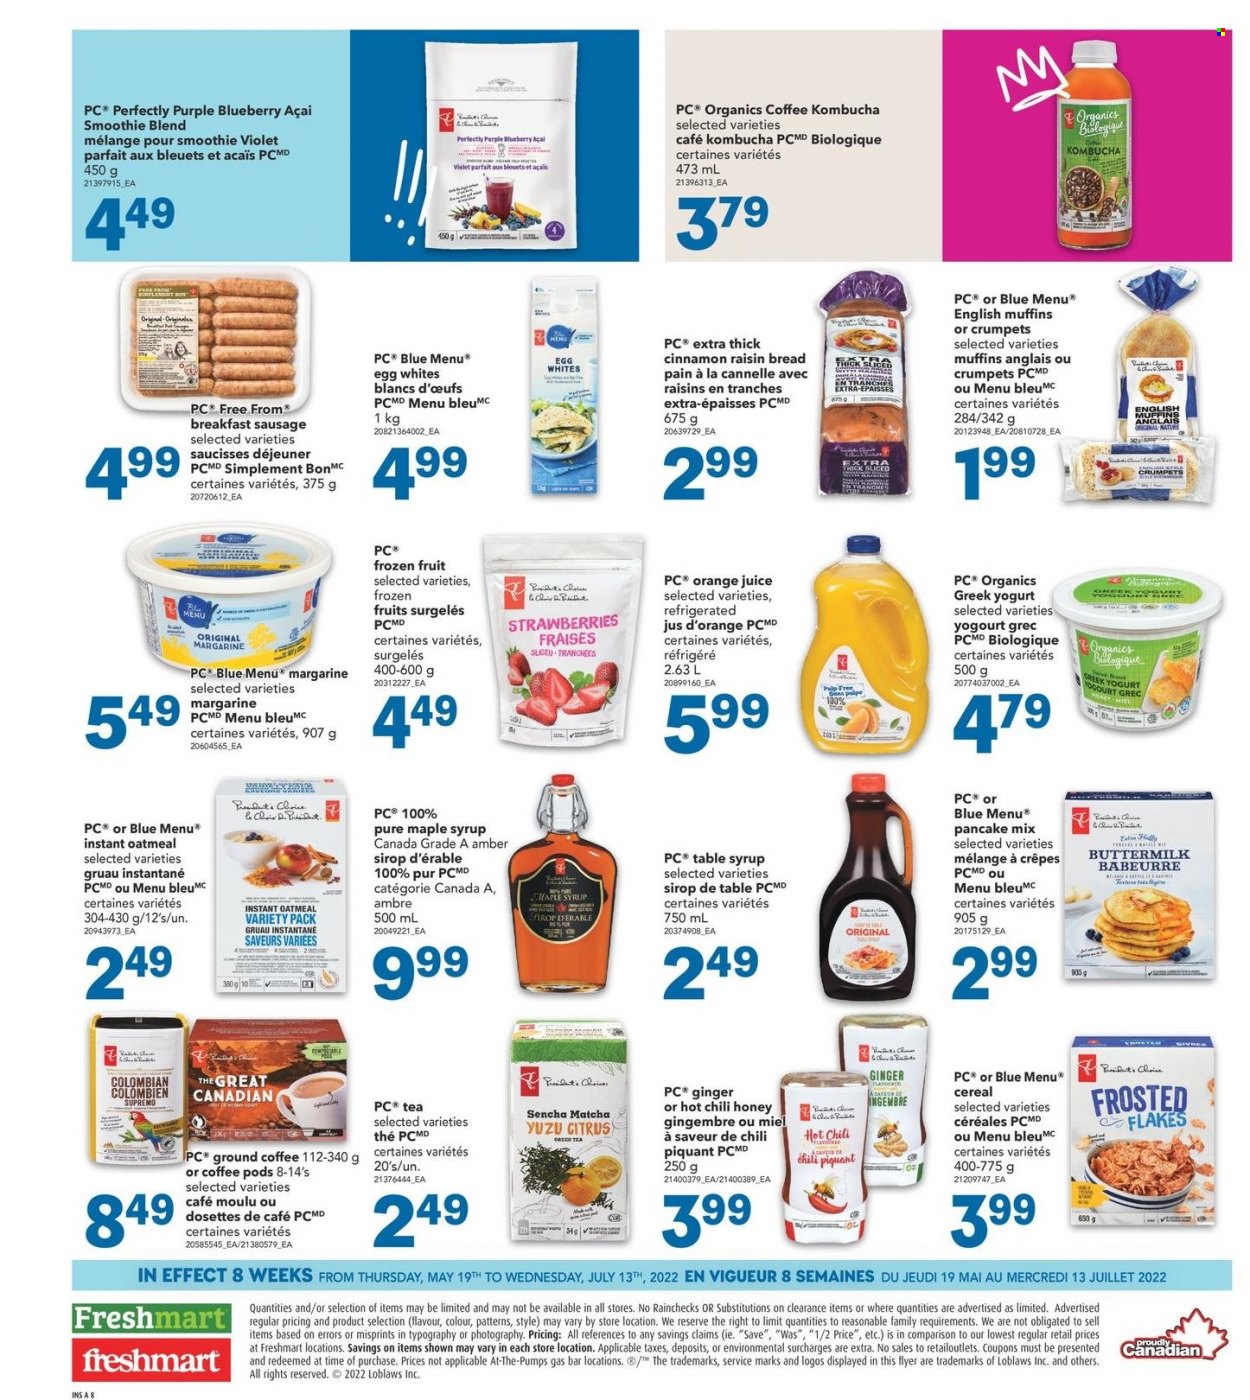 thumbnail - Freshmart Flyer - May 19, 2022 - July 13, 2022 - Sales products - bread, english muffins, crumpets, Ace, strawberries, pancakes, sausage, Président, greek yoghurt, yoghurt, buttermilk, eggs, margarine, oatmeal, cereals, Frosted Flakes, maple syrup, honey, syrup, dried fruit, orange juice, juice, smoothie, kombucha, green tea, matcha, tea, coffee pods, ground coffee, raisins. Page 8.